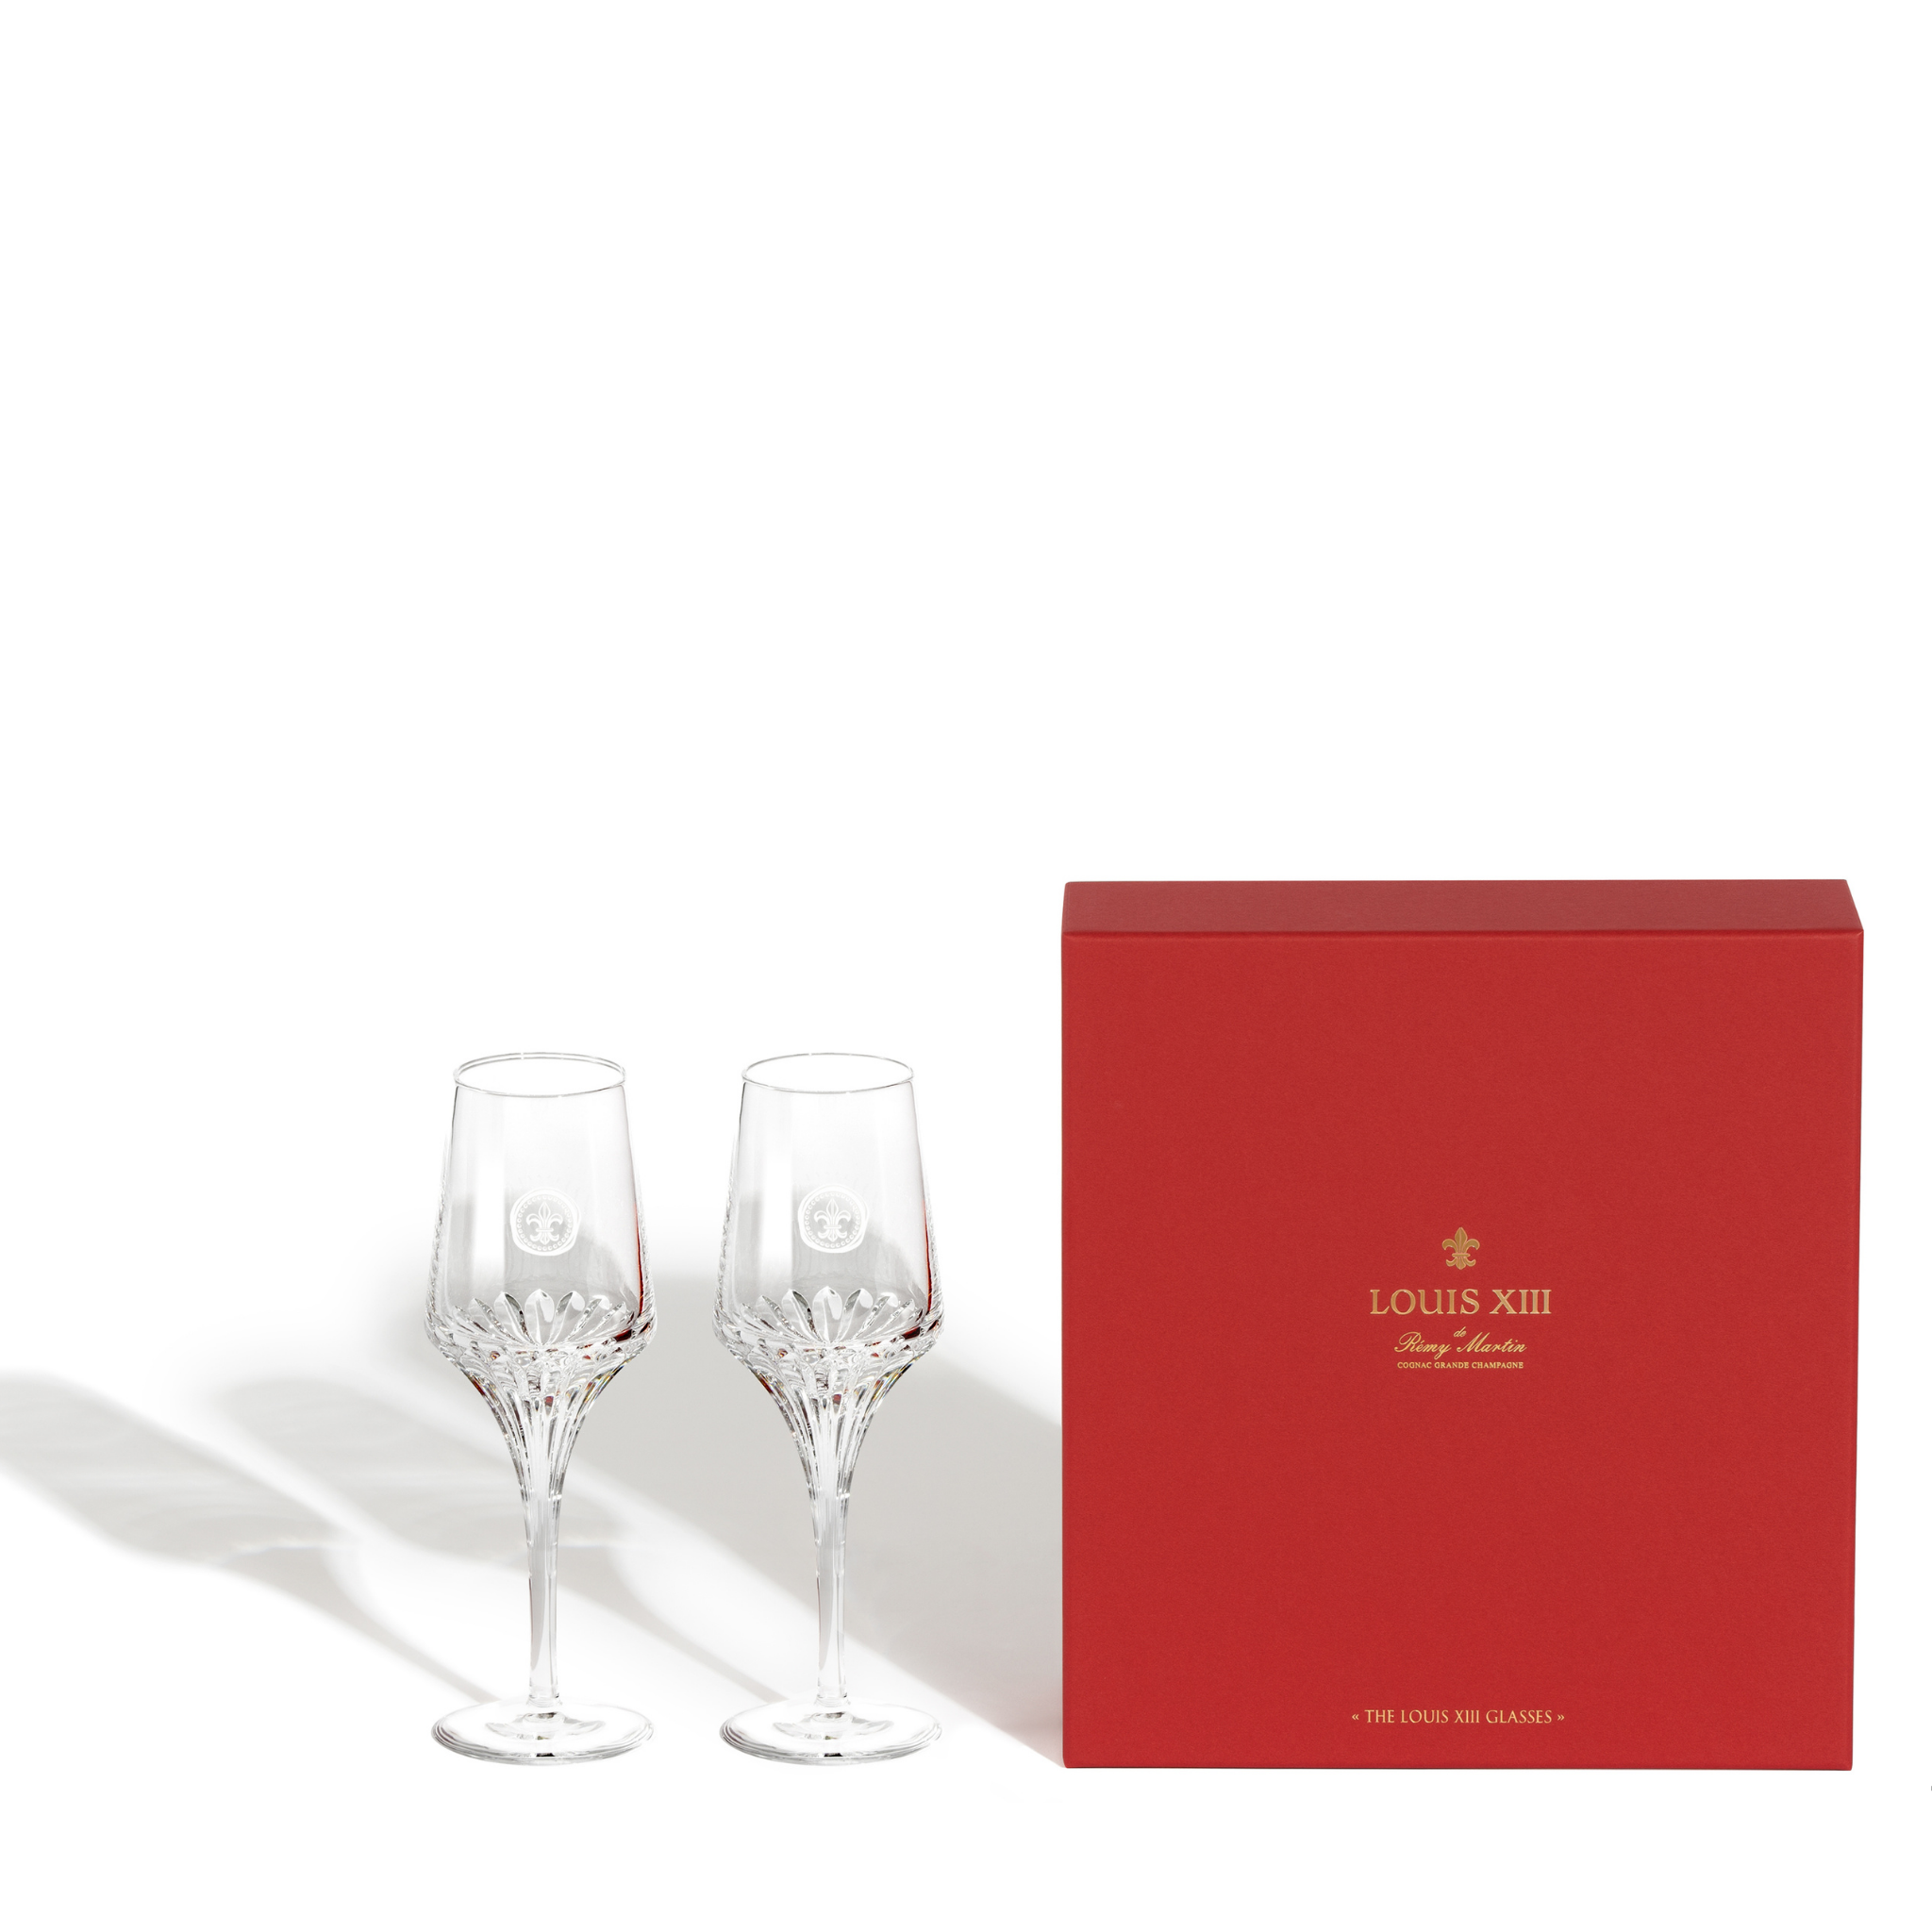 Remy Martin Louis XIII Baccarat Crystal Cognac Glass Set (Pair of 2 Glasses)